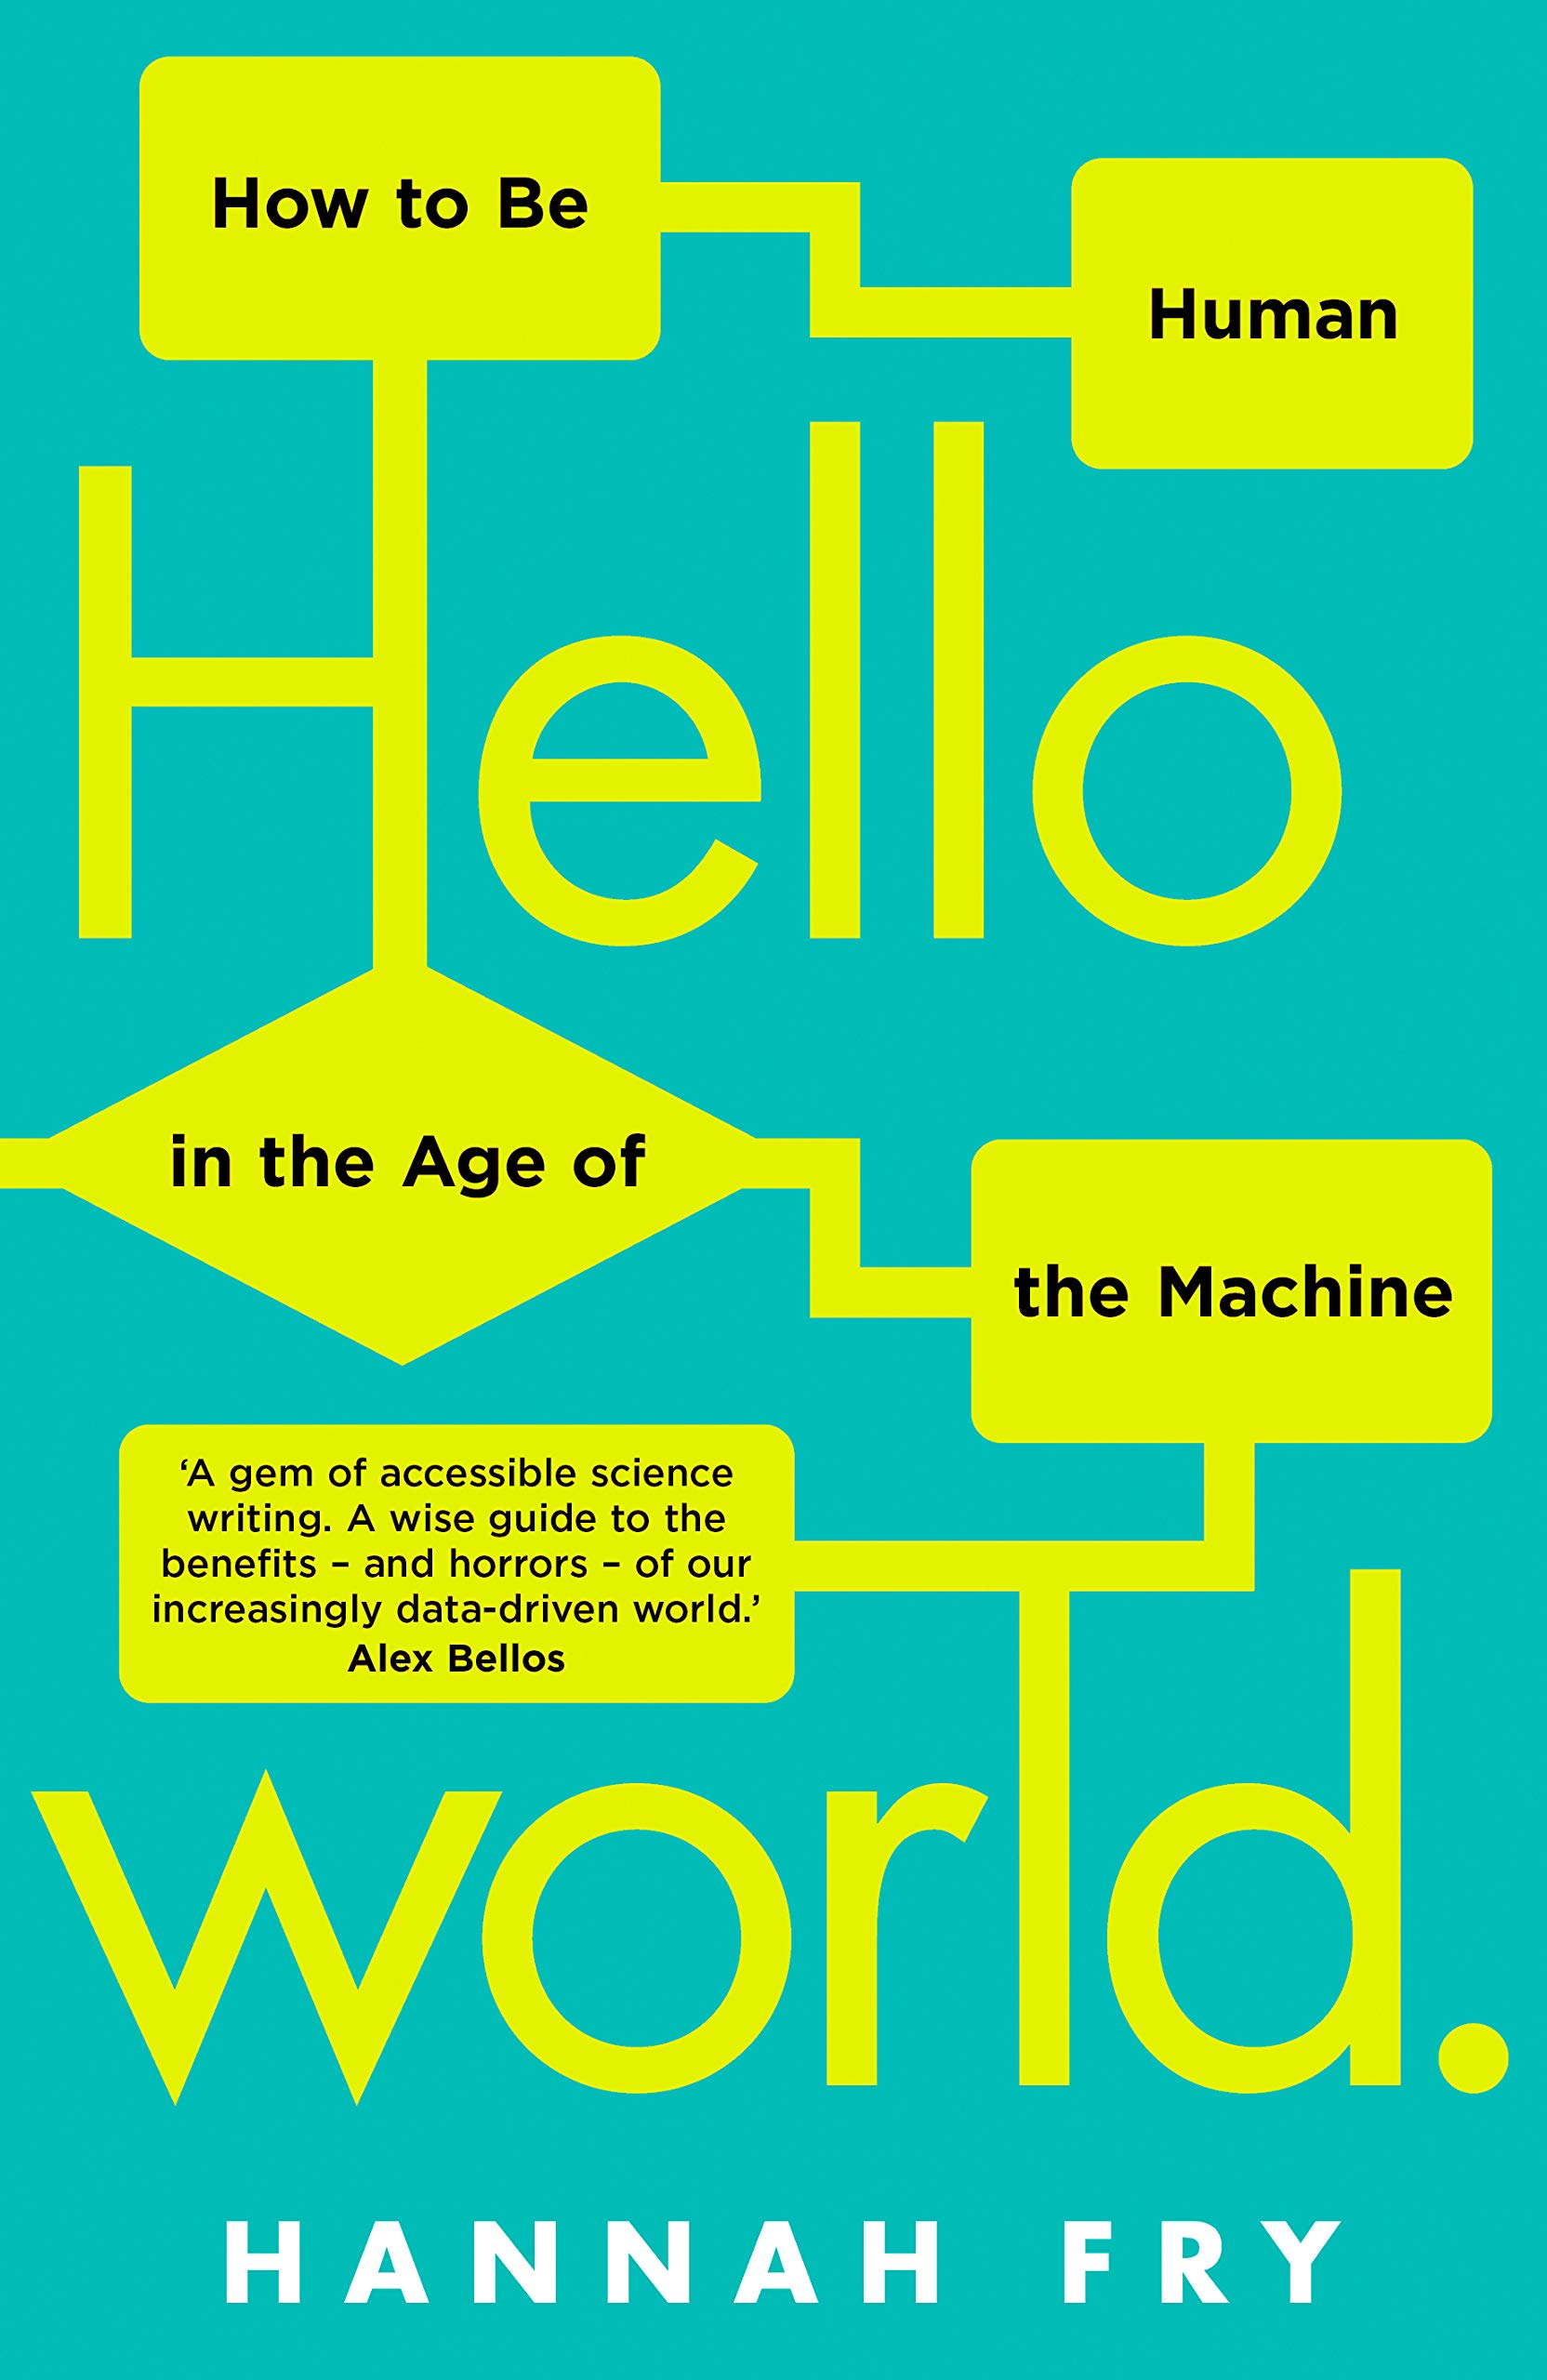  How to be Human in the Age of the Machine" di Hannah Fry. Penguin, 2018, 256 pagine.